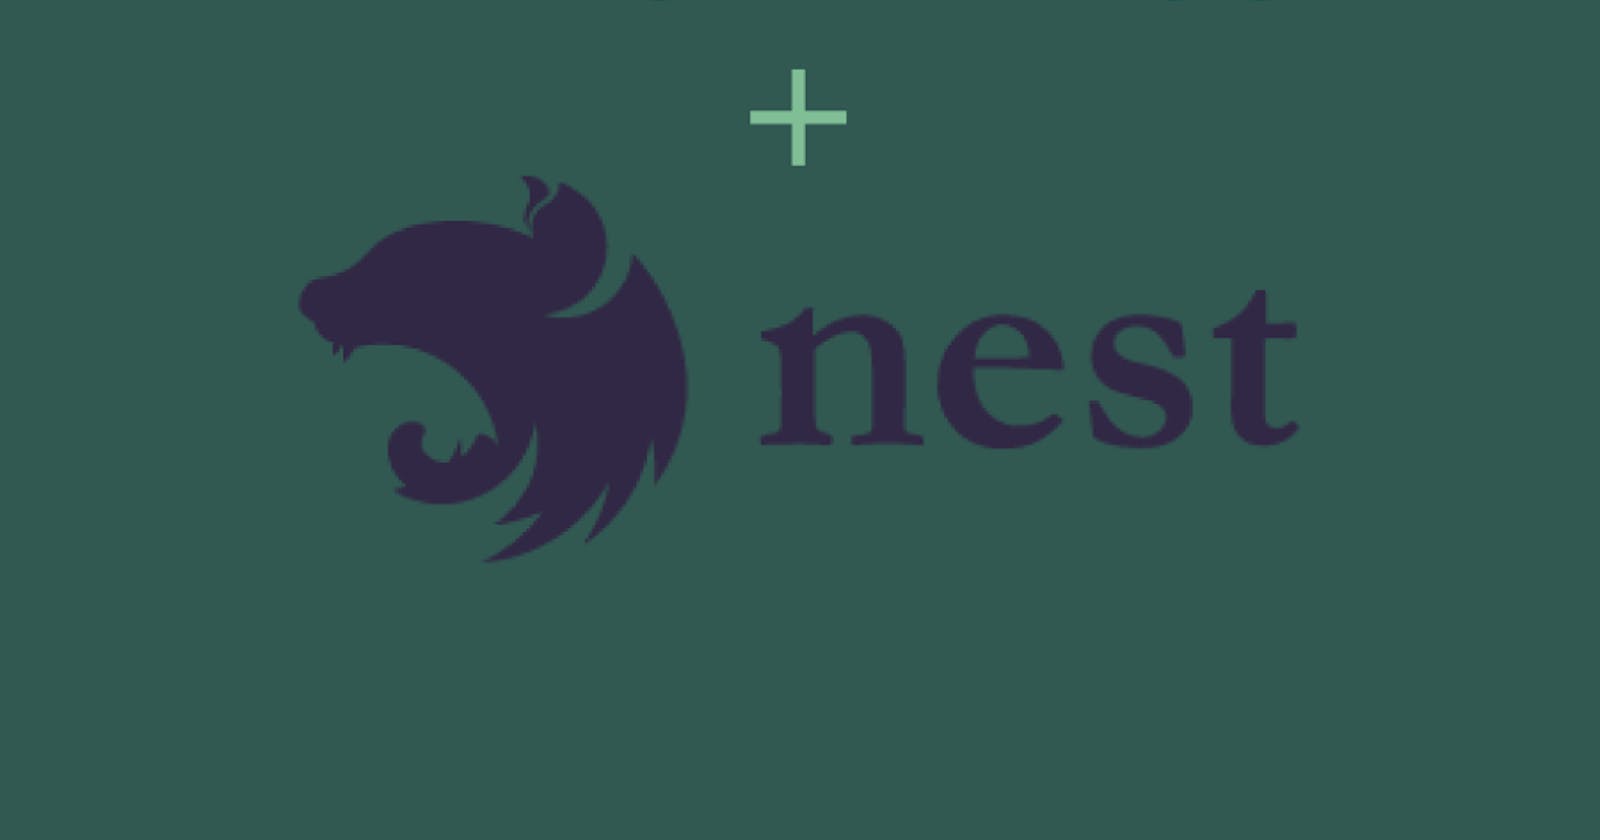 How to integrate Feature Flags in NestJS